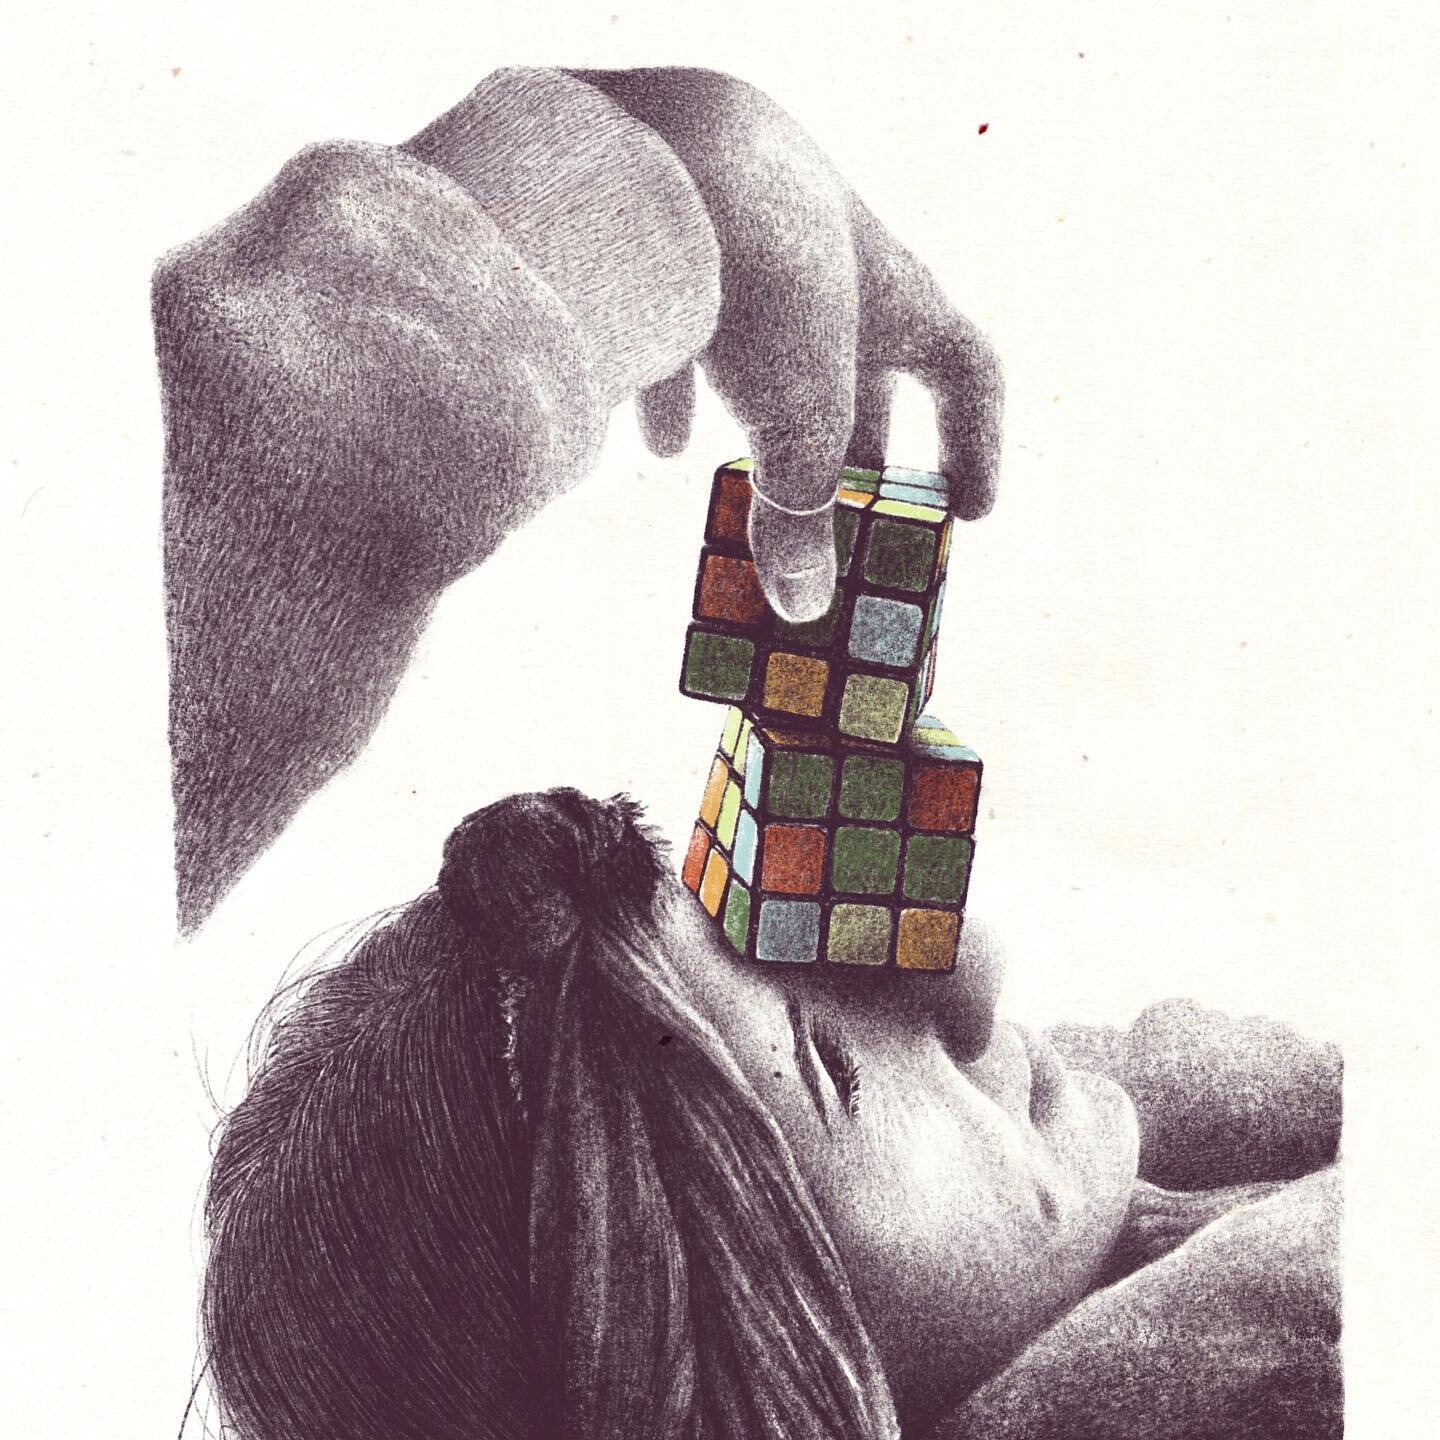 Zauberw&uuml;rfel
⊹
This is an oldie but some of you may have never seen it. It&rsquo;s part of a series of (except for these cubes) monochrome drawings I made some years ago. This one I drew at a time when the rubiks cube fever had overtaken a subst